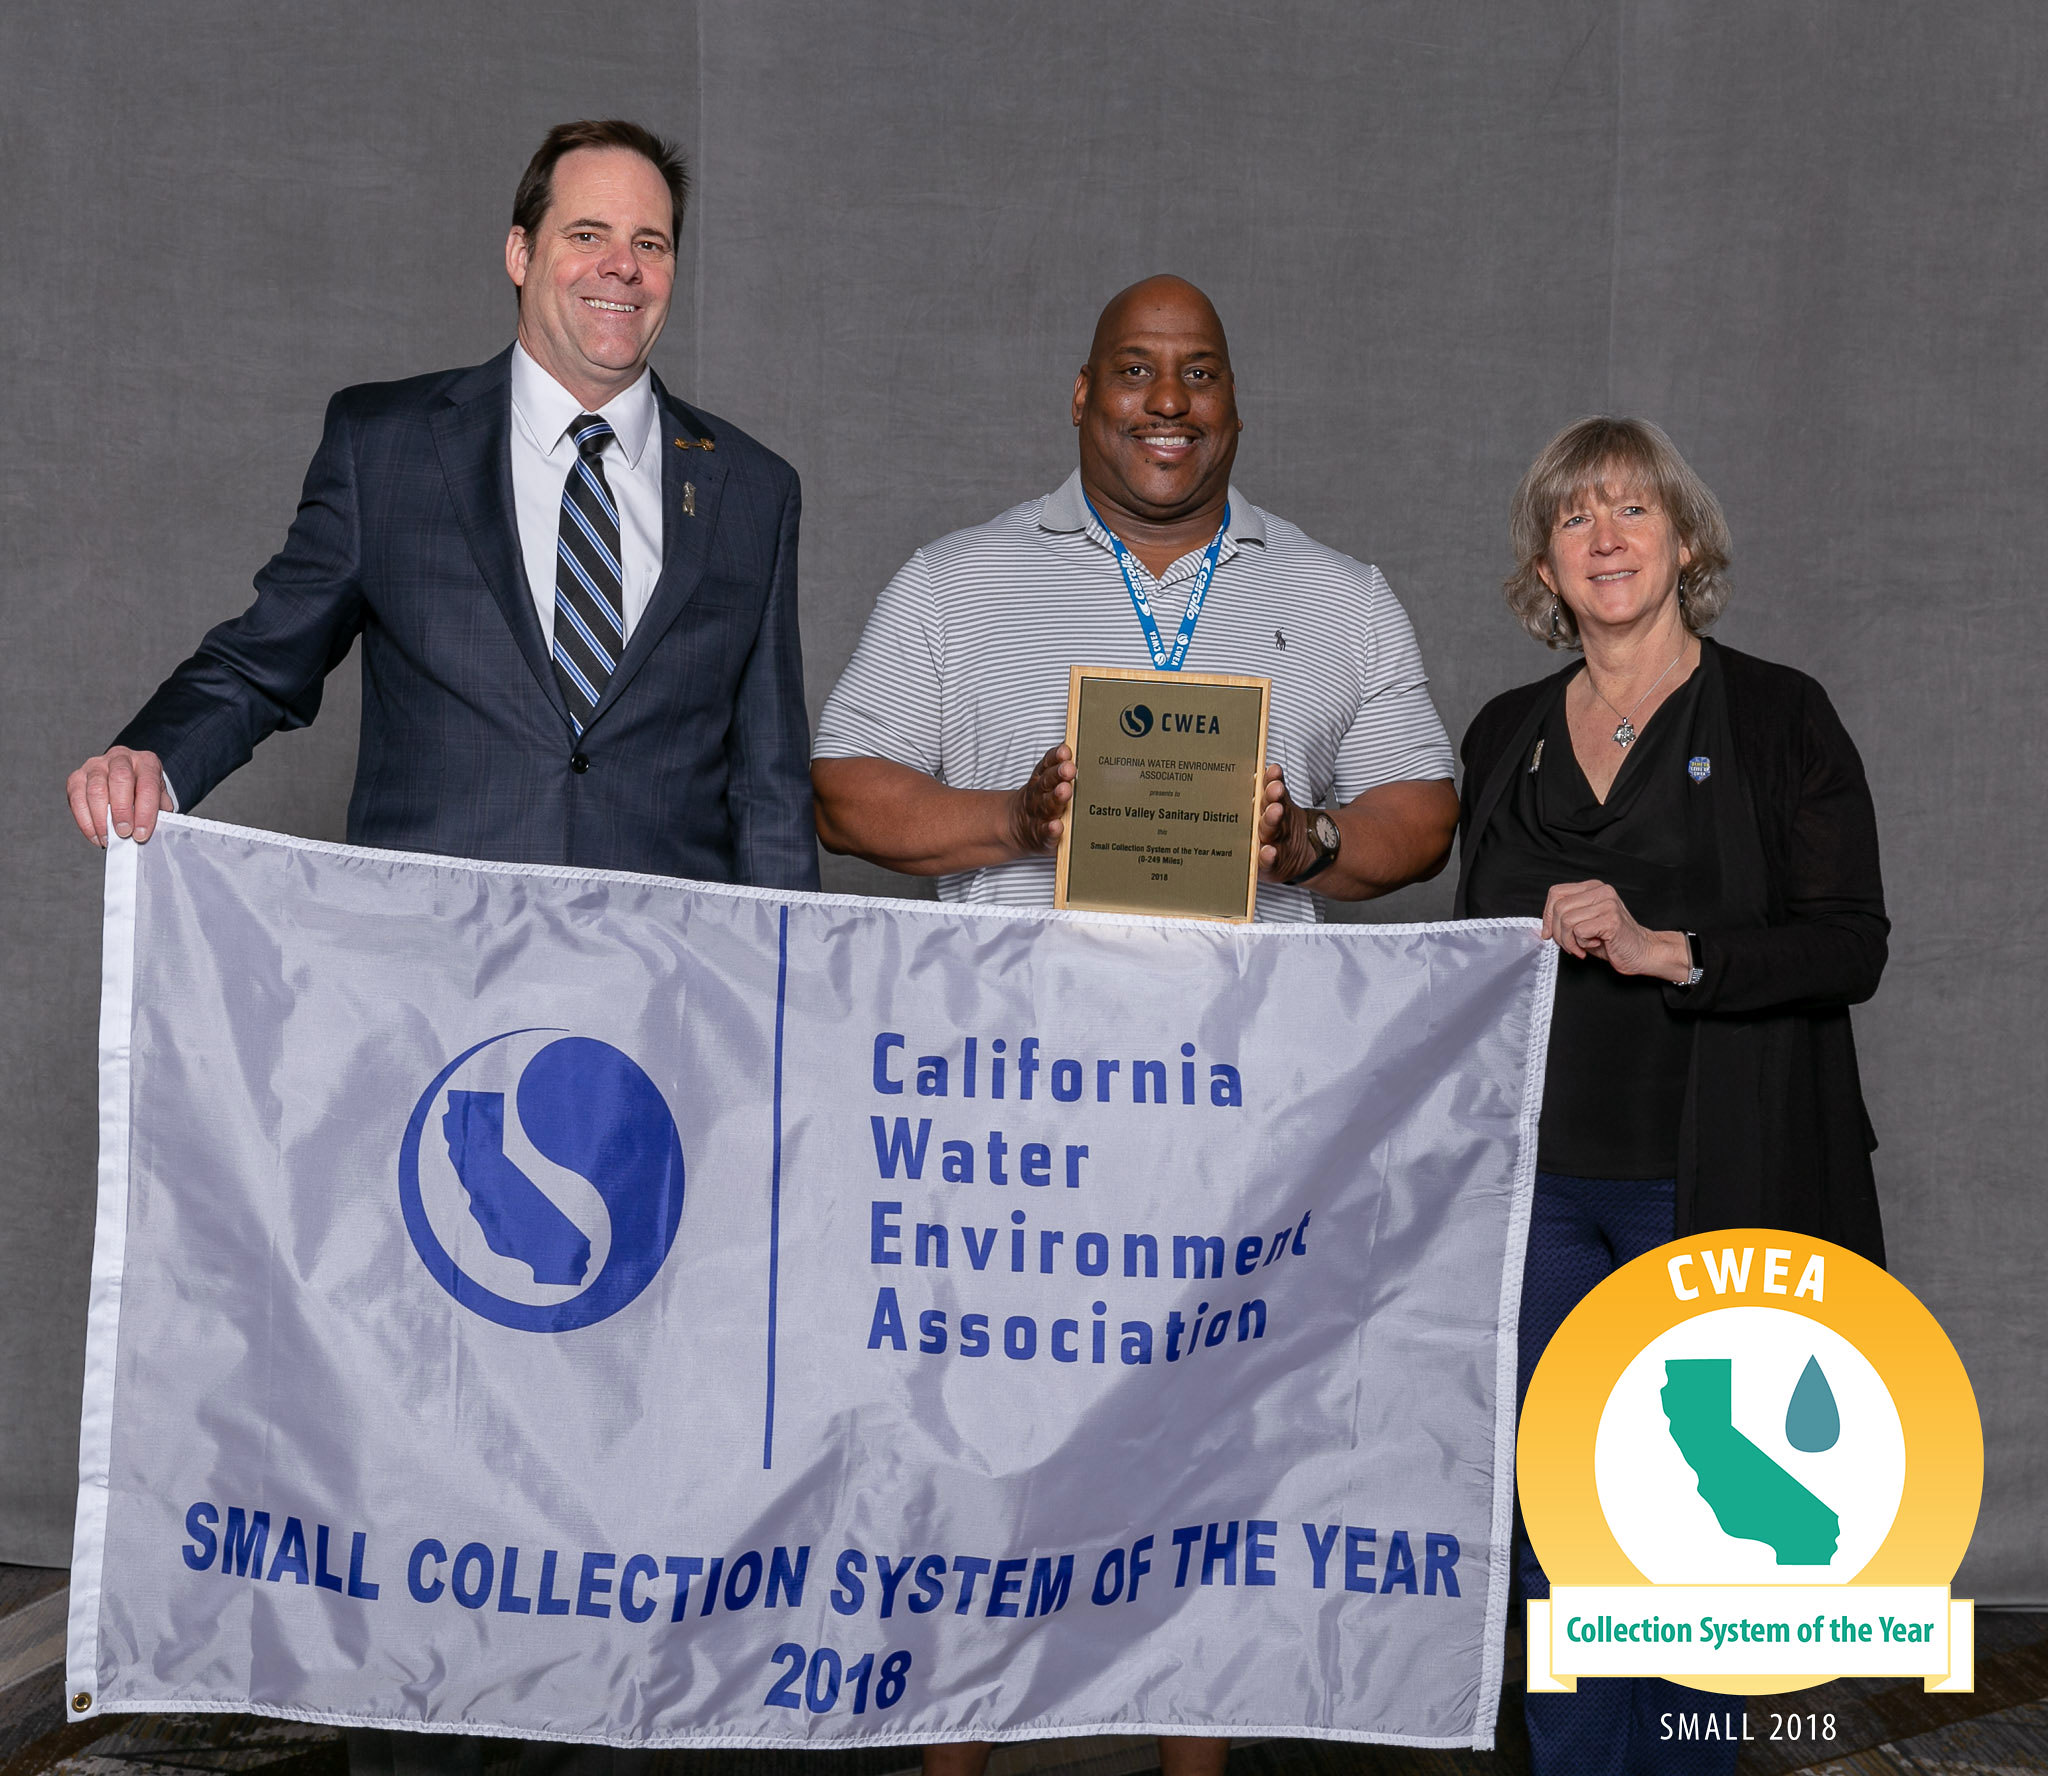 Collection System of the Year Small (0-249 Miles): Castro Valley Sanitary District